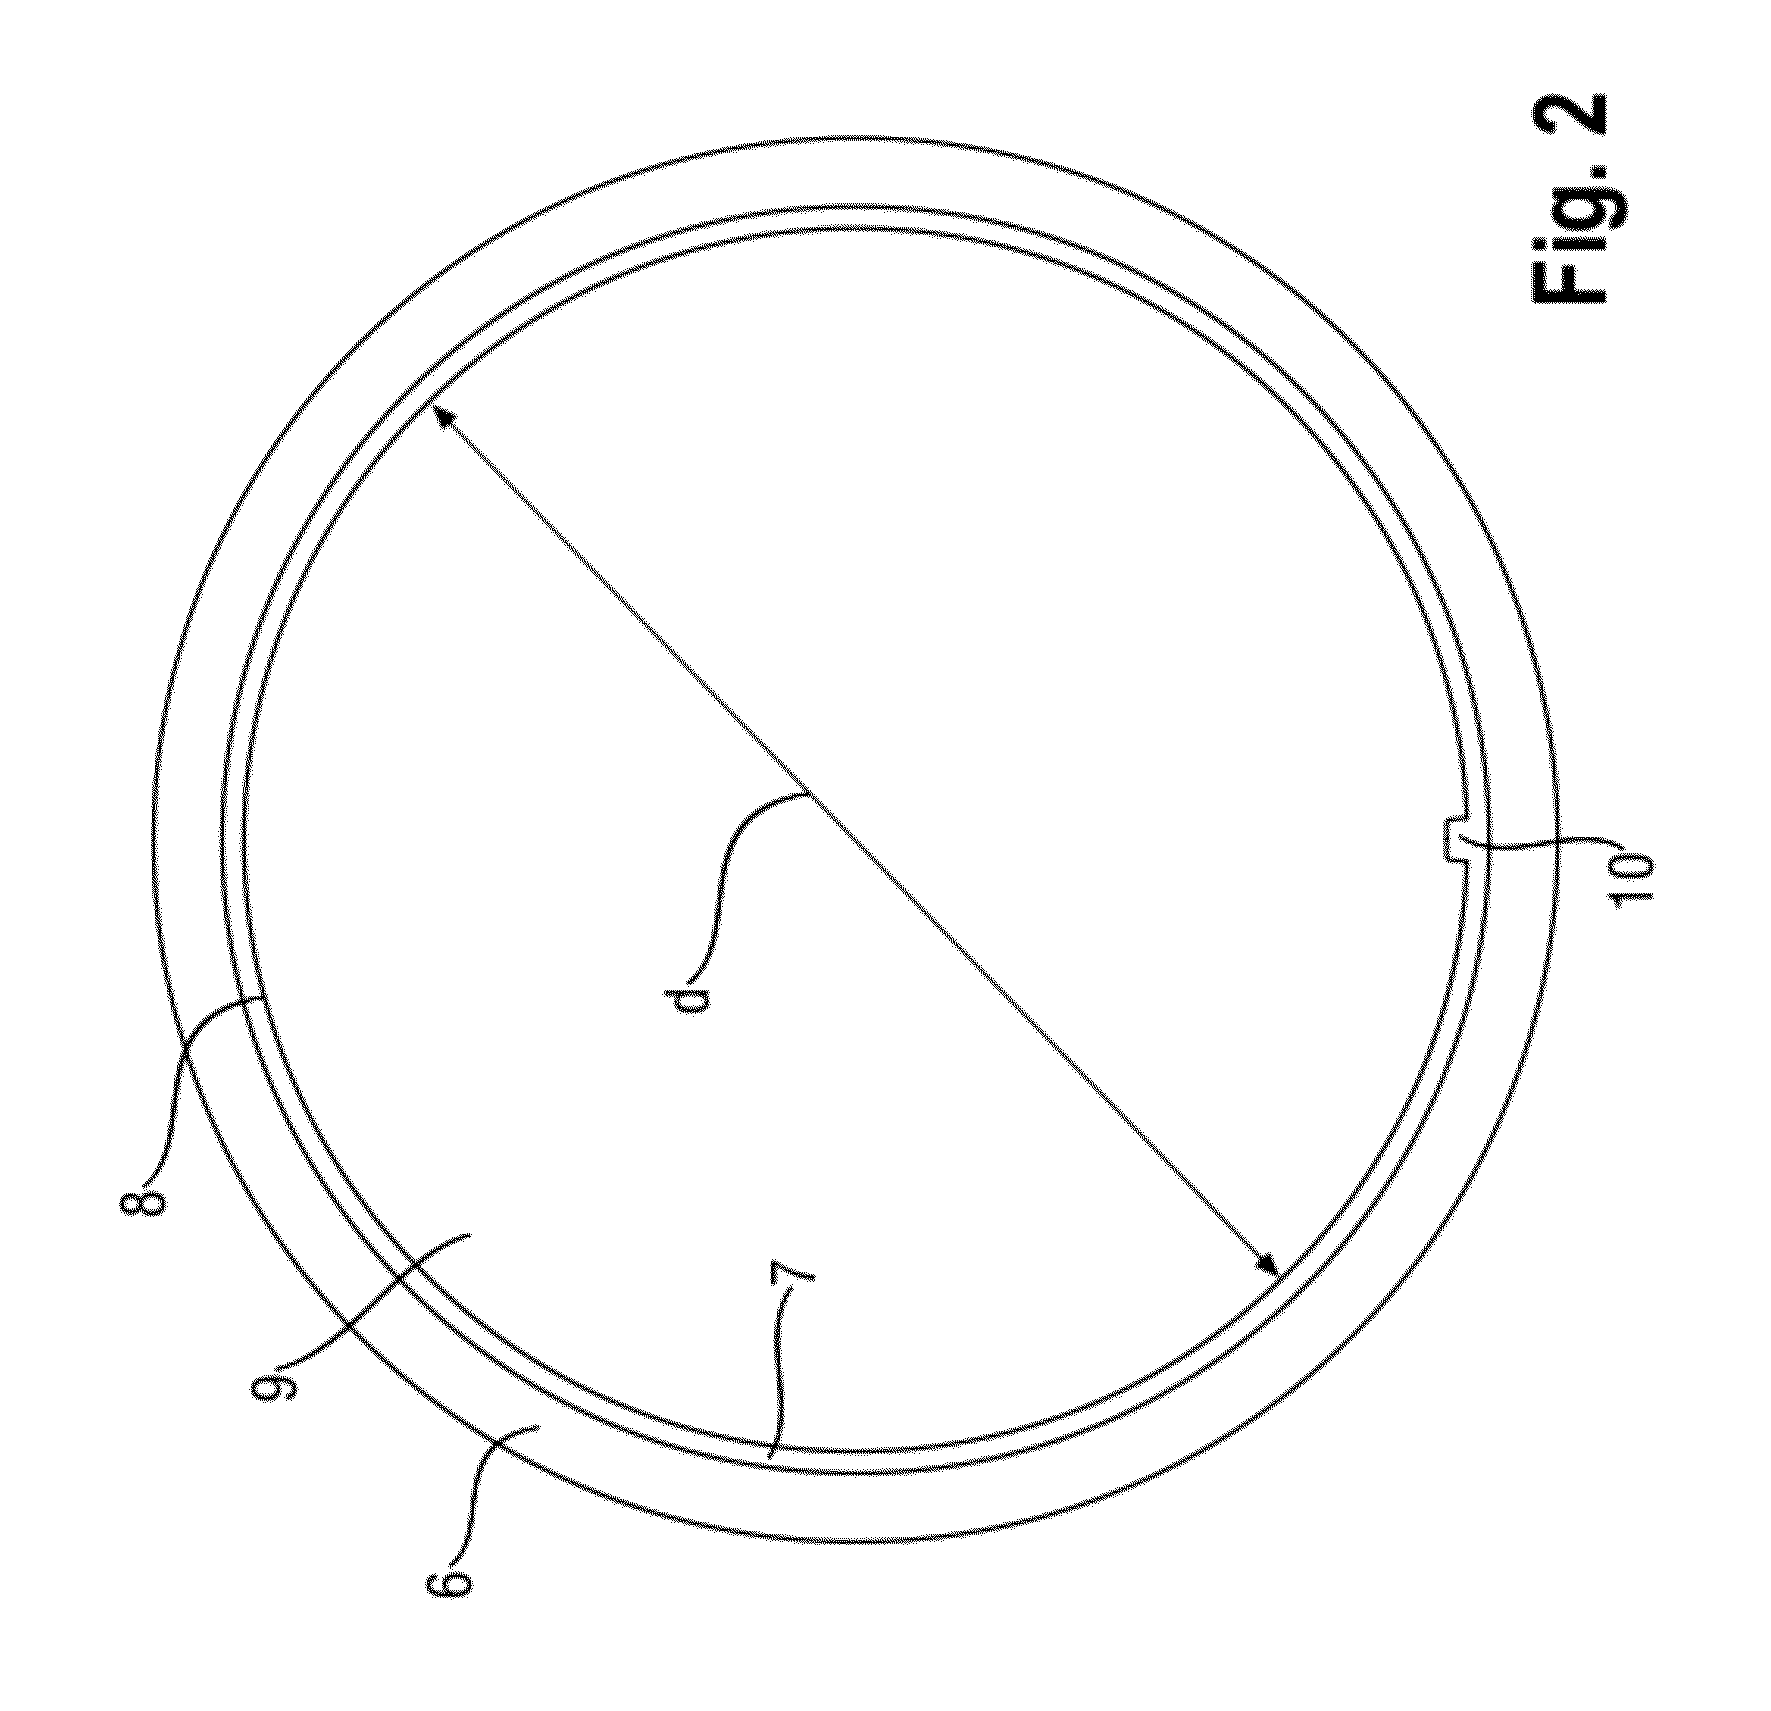 Susceptor for supporting a semiconductor wafer and method for depositing a layer on a front side of a semiconductor wafer